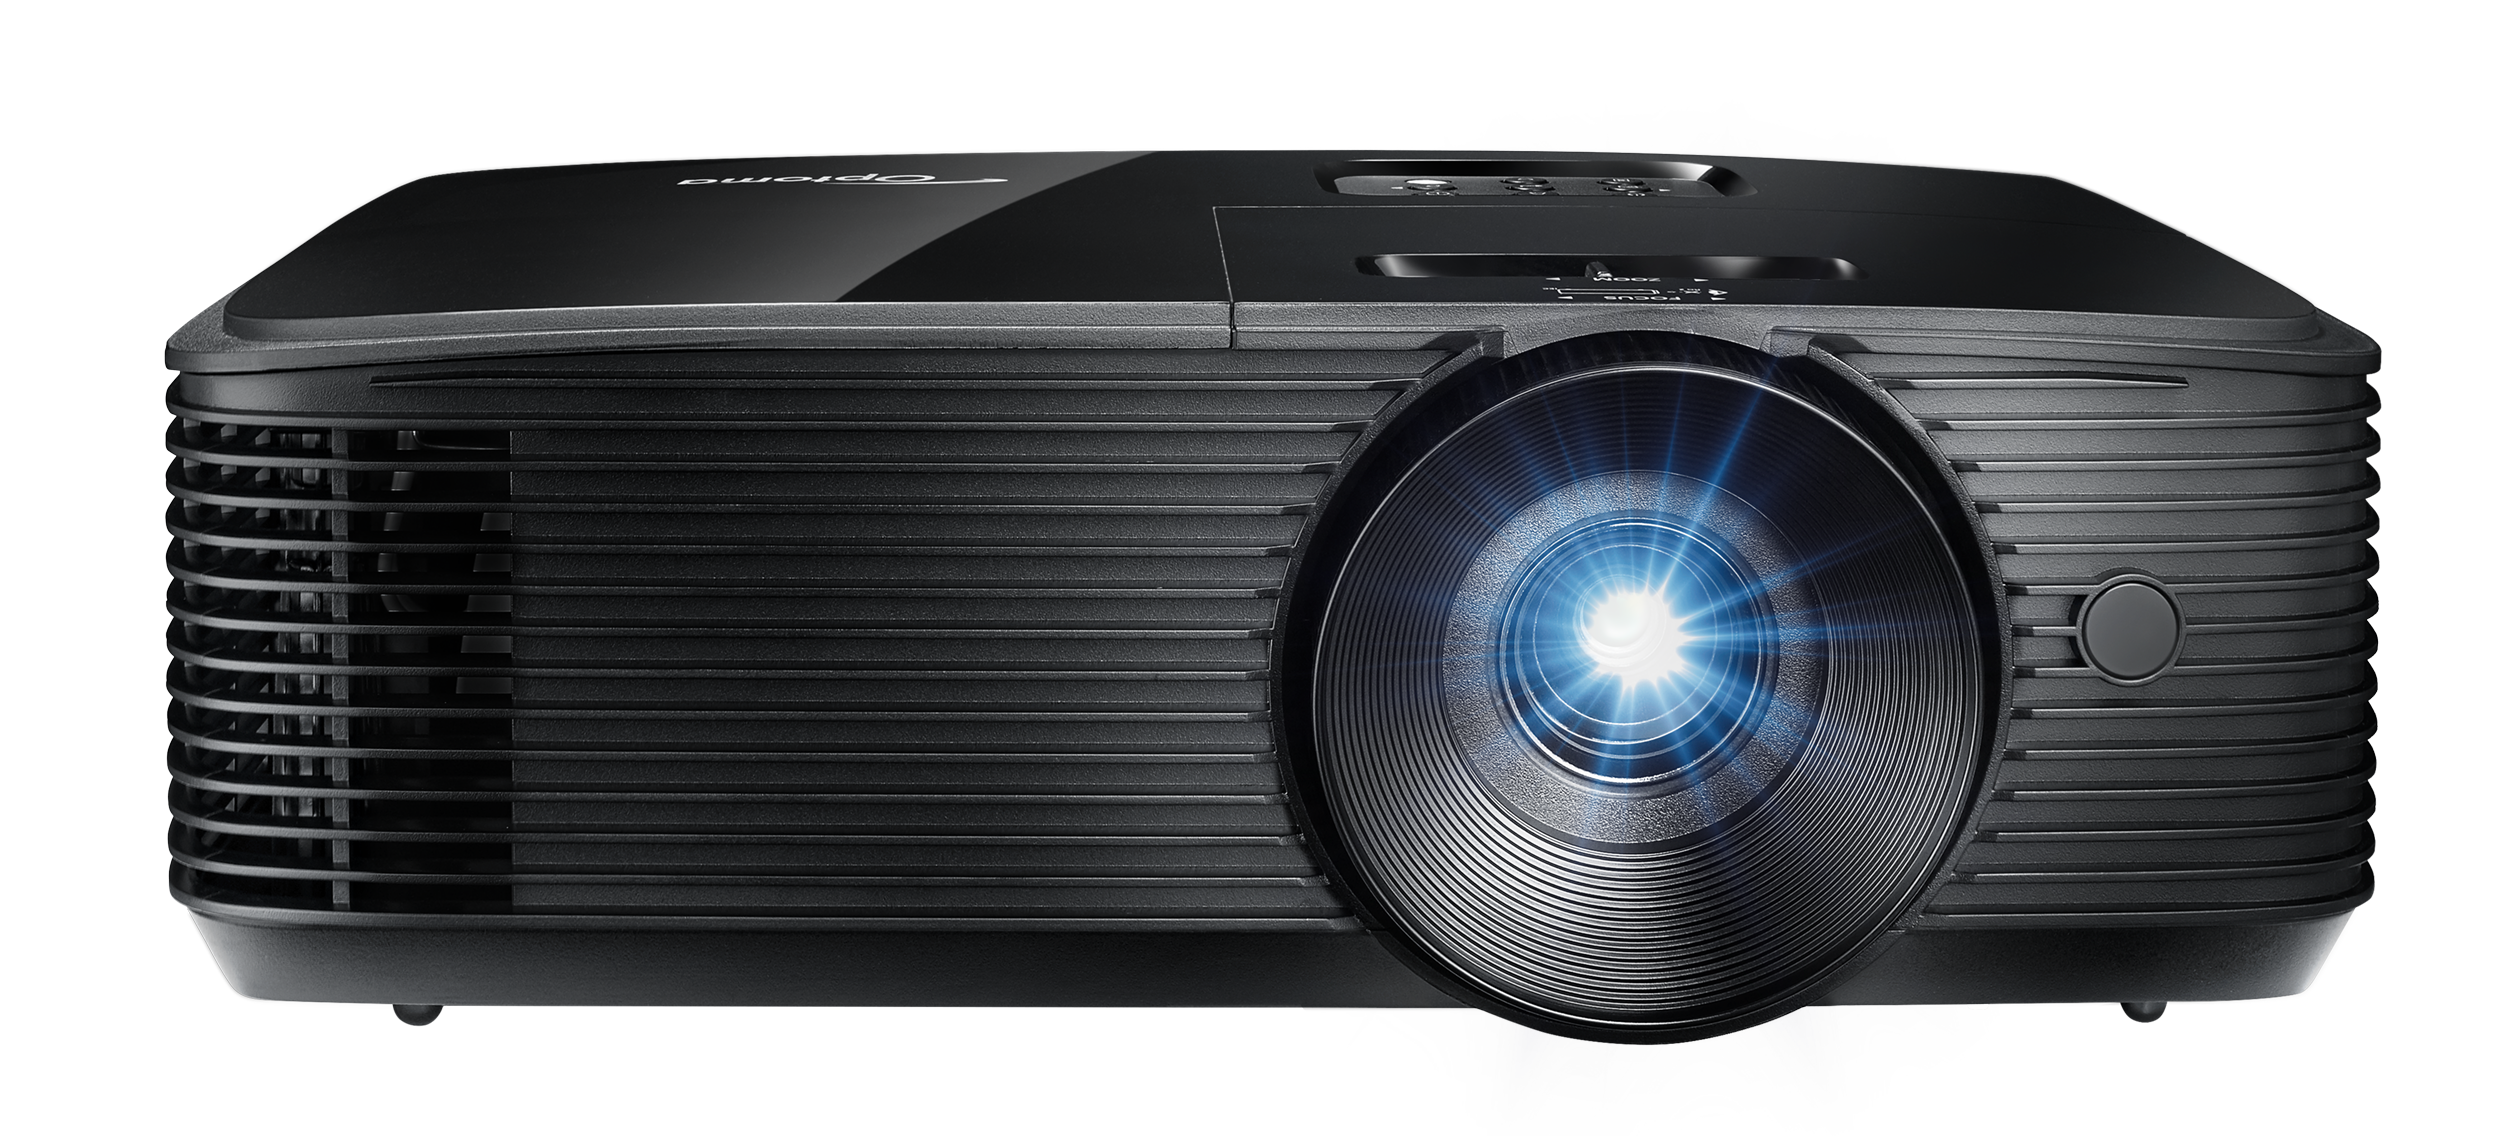 HD146X Full HD 1080p Vibrant Home Theater Projector for Movies and Gaming, 3600 Lumens - image 1 of 9